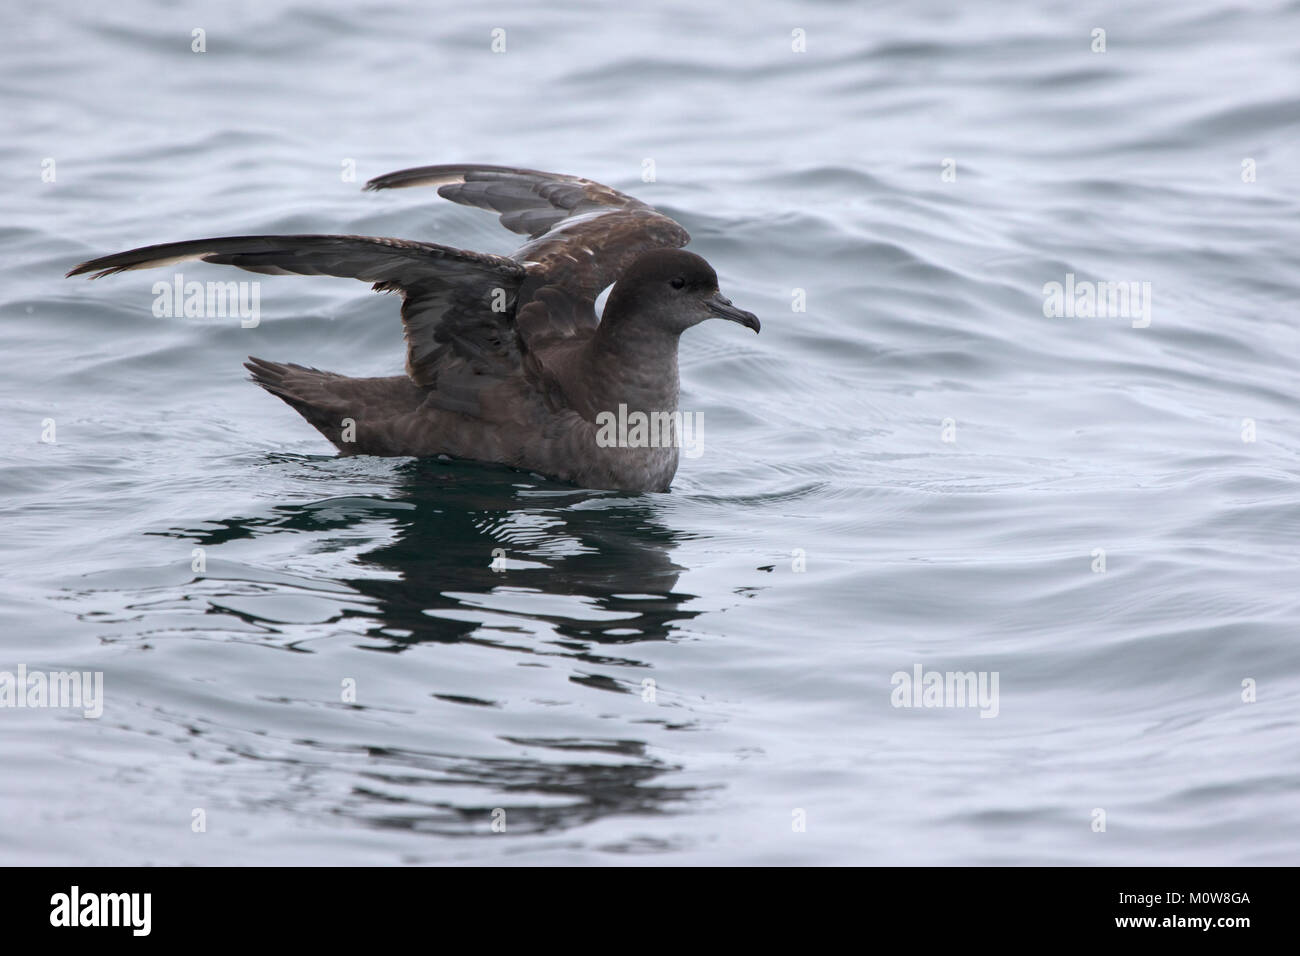 Short-tailed shearwater sitting on the water and ready to fly Stock Photo